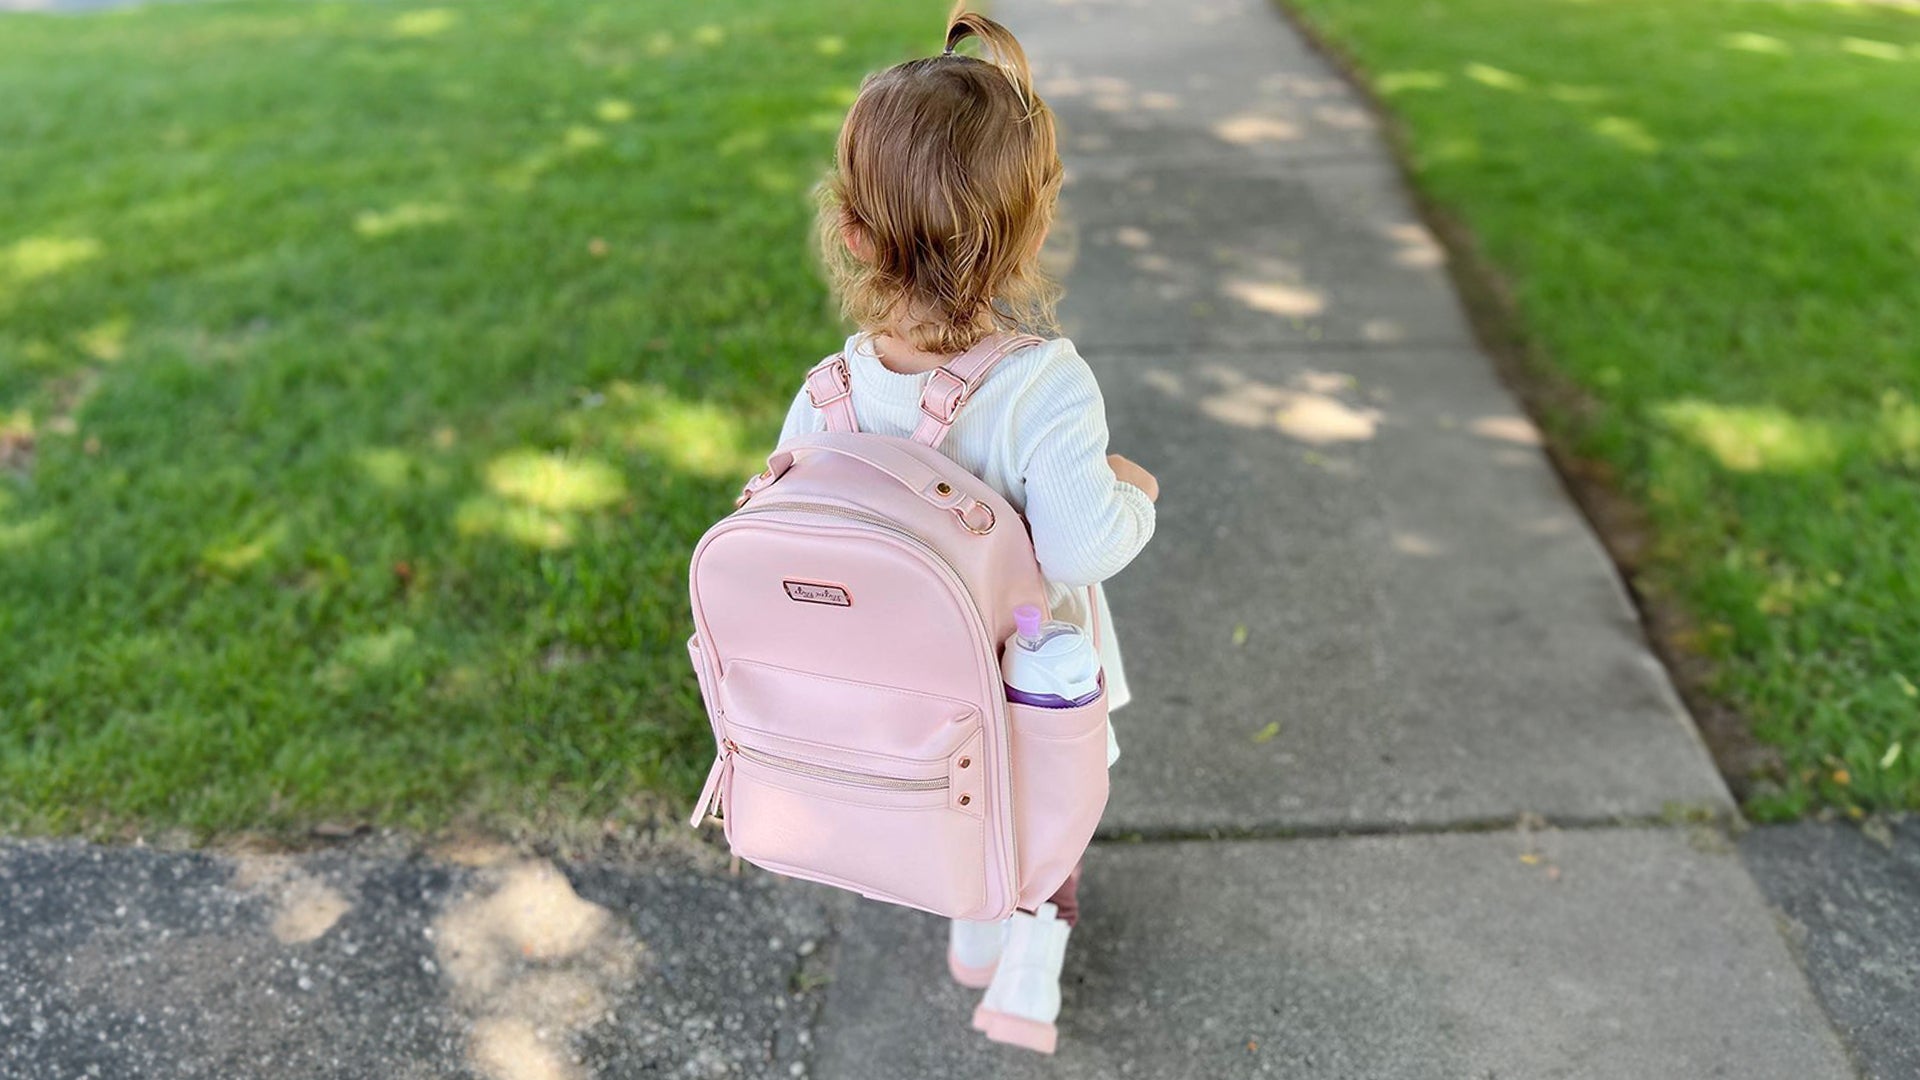 A little girl carrying an Itzy Ritzy Toddler Backpack